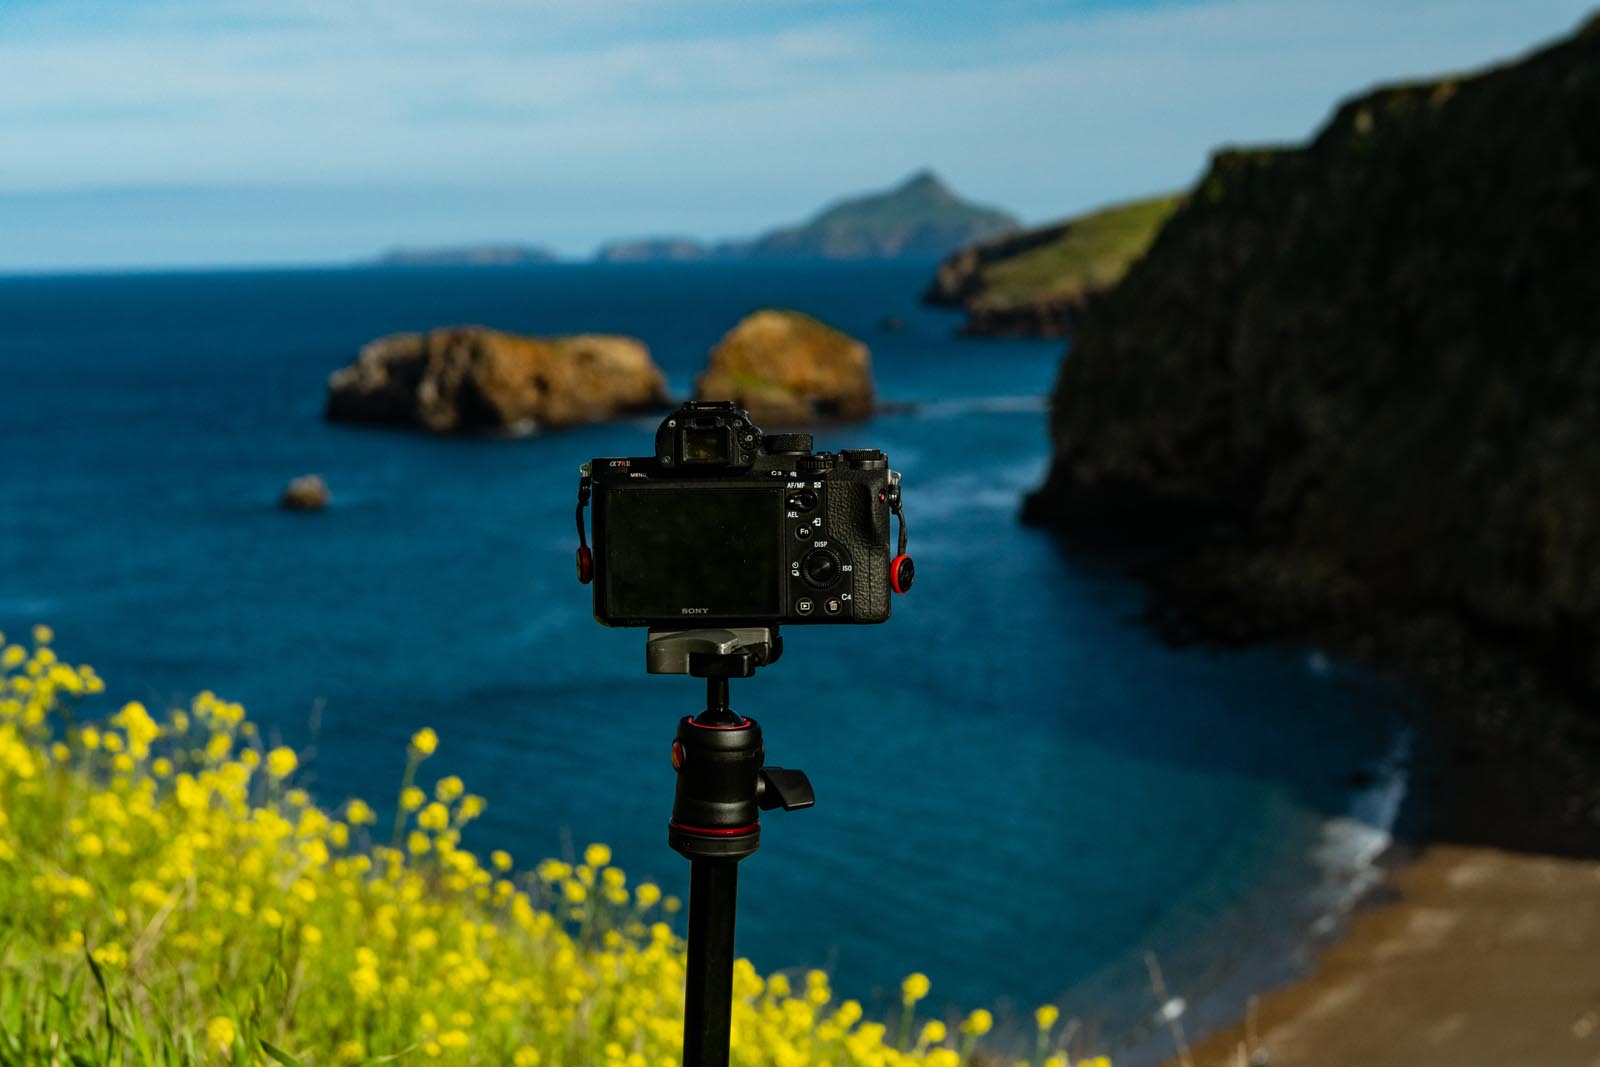 A visual of a camera on a tripod overlooking the coastal cliffs of the channel islands in California as a place holder for an example of what is time lapse photography.